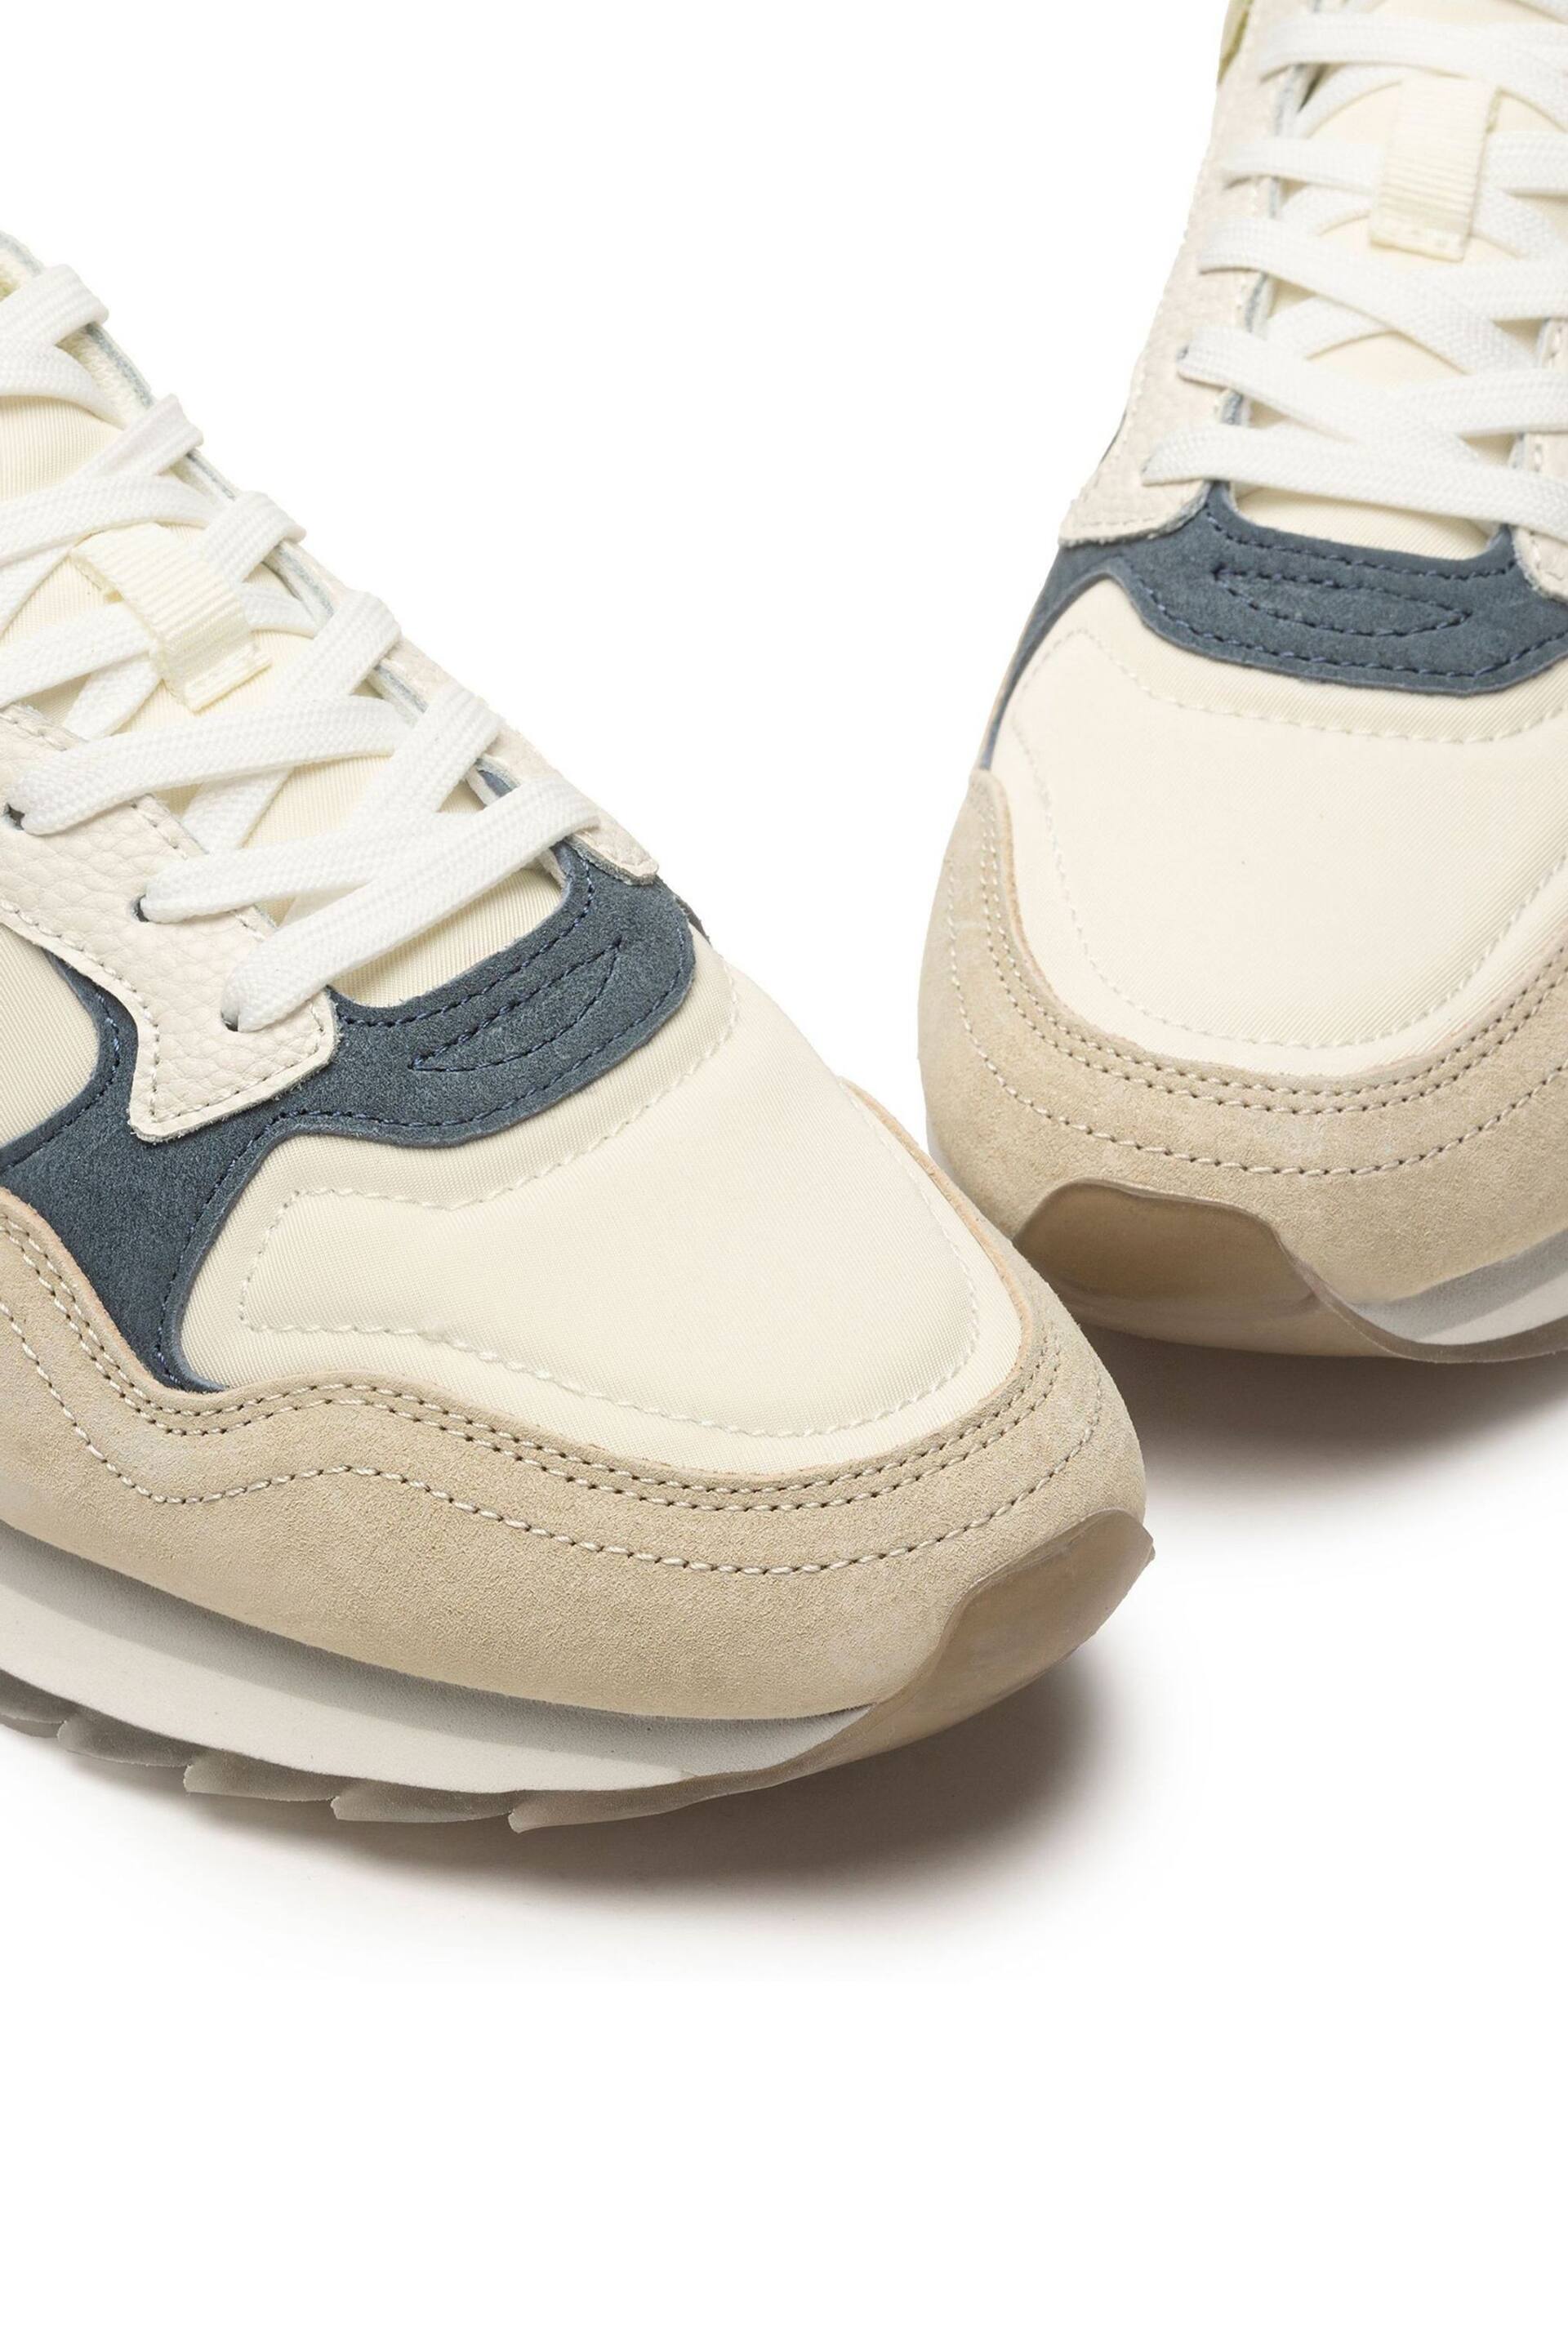 HOFF Natural Monte Carlo Trainers - Image 4 of 5